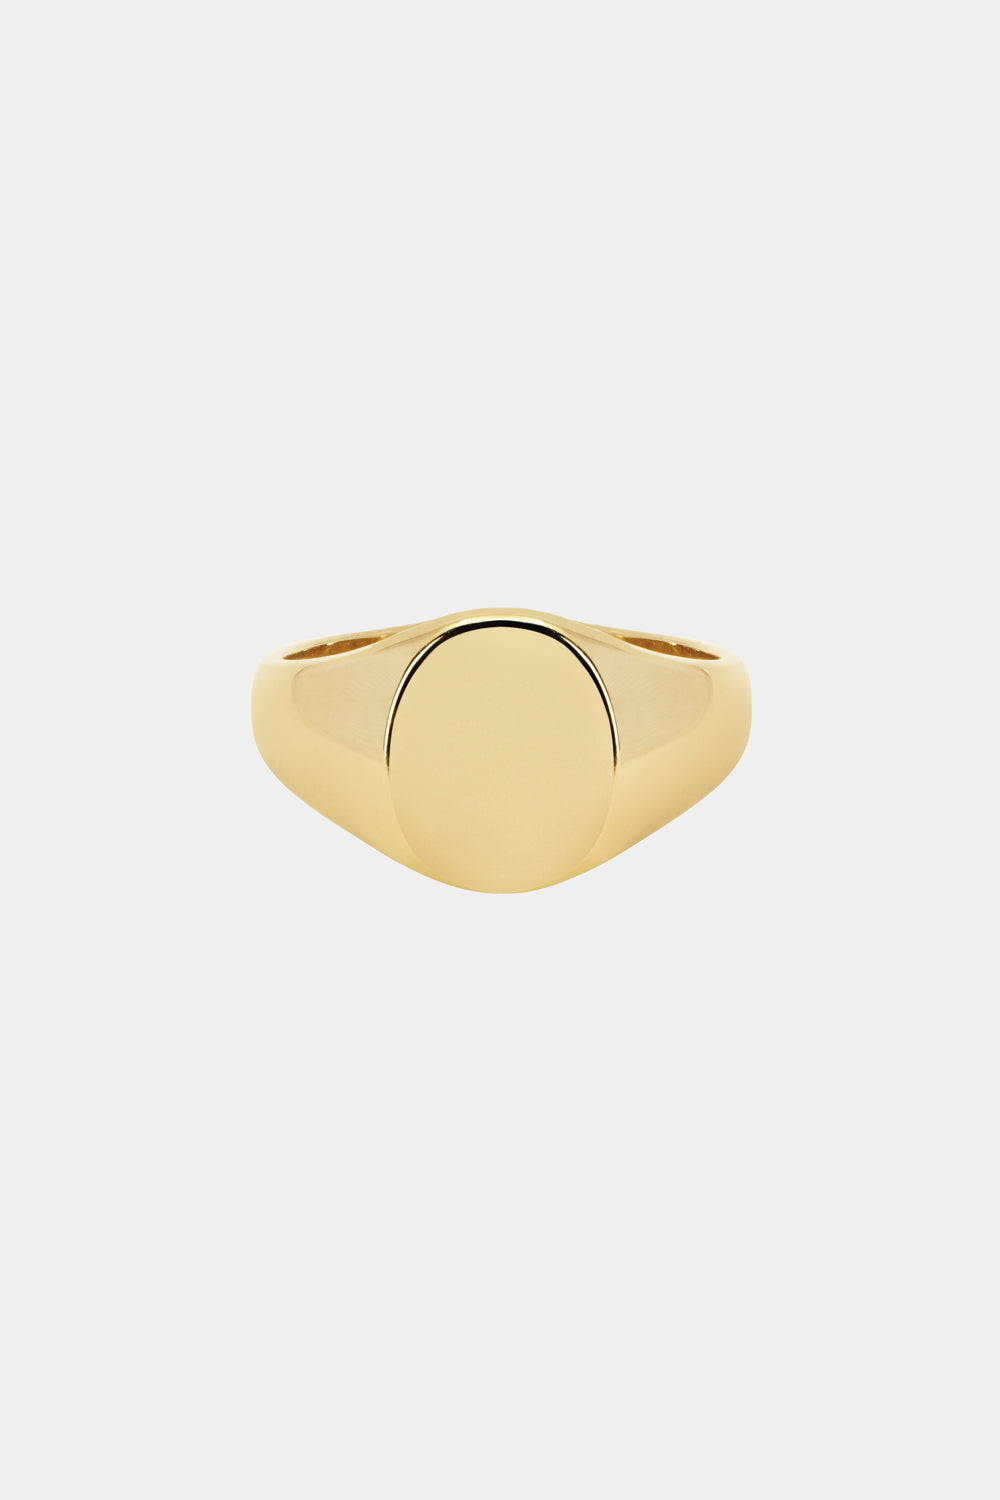 Oval Signet Ring | Yellow Gold, More Options Available